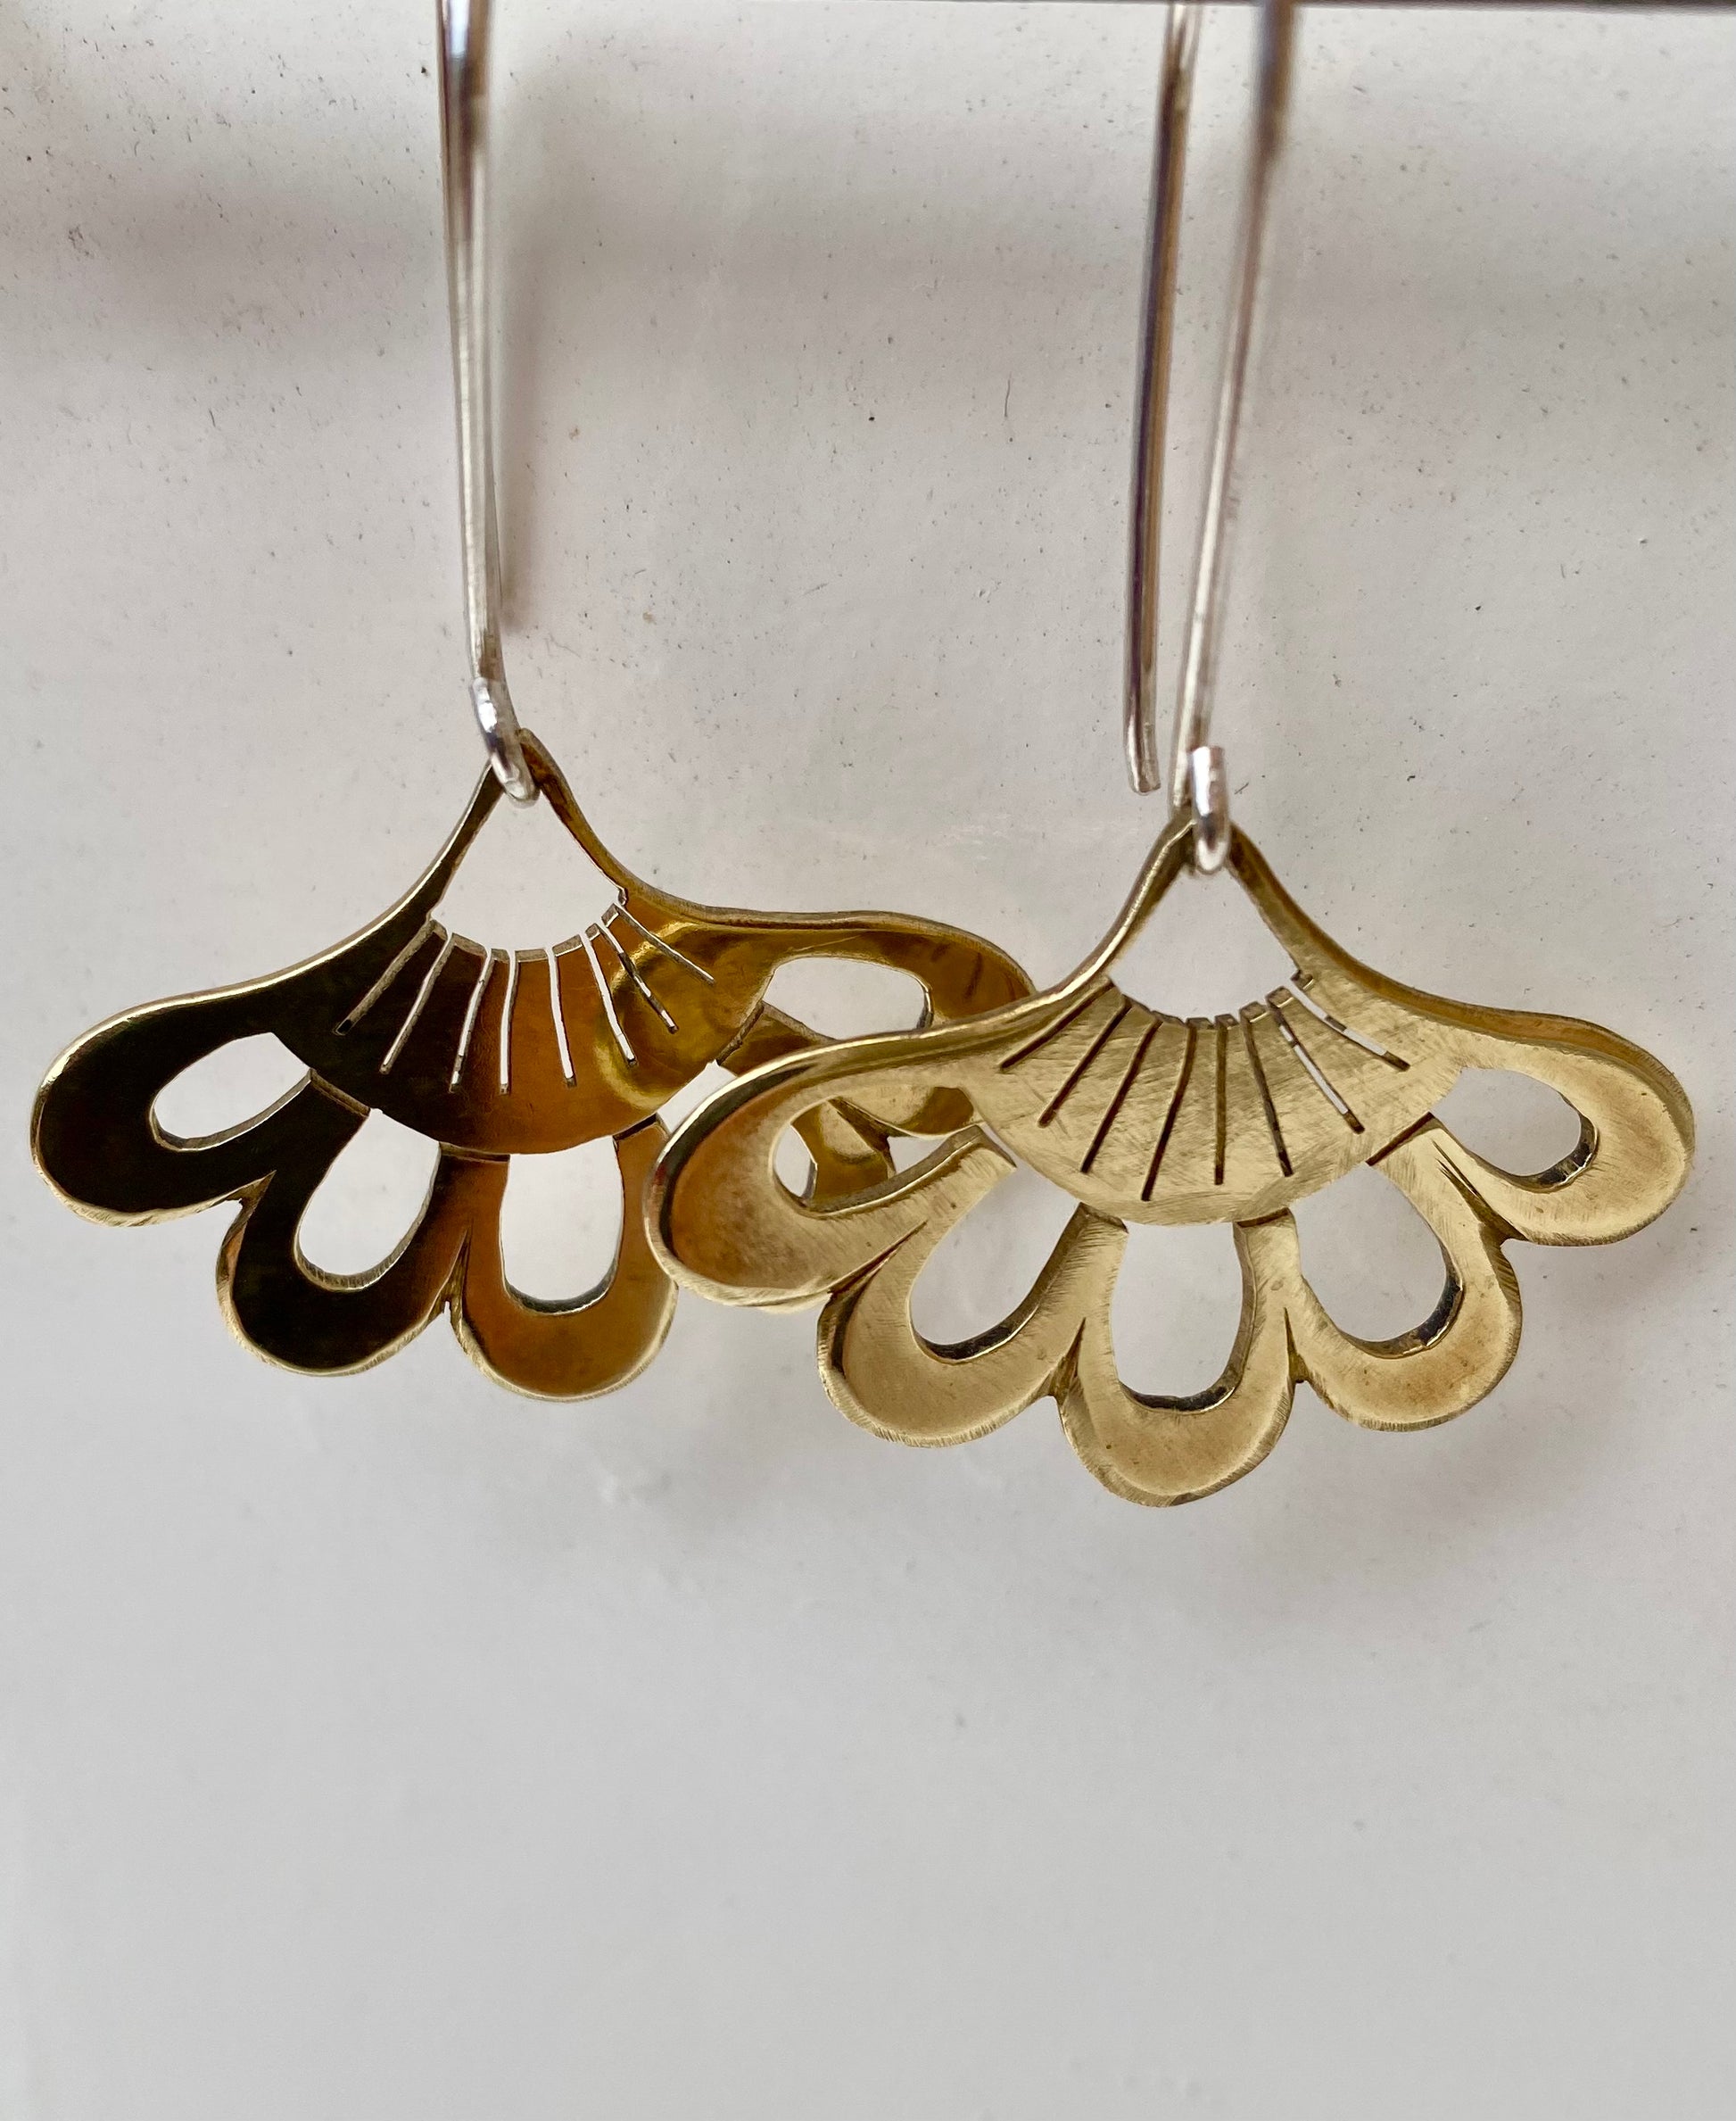 A pair of brass lotus-inspired hook earrings, hanging gracefully with detailed petal design, reflecting a golden hue.